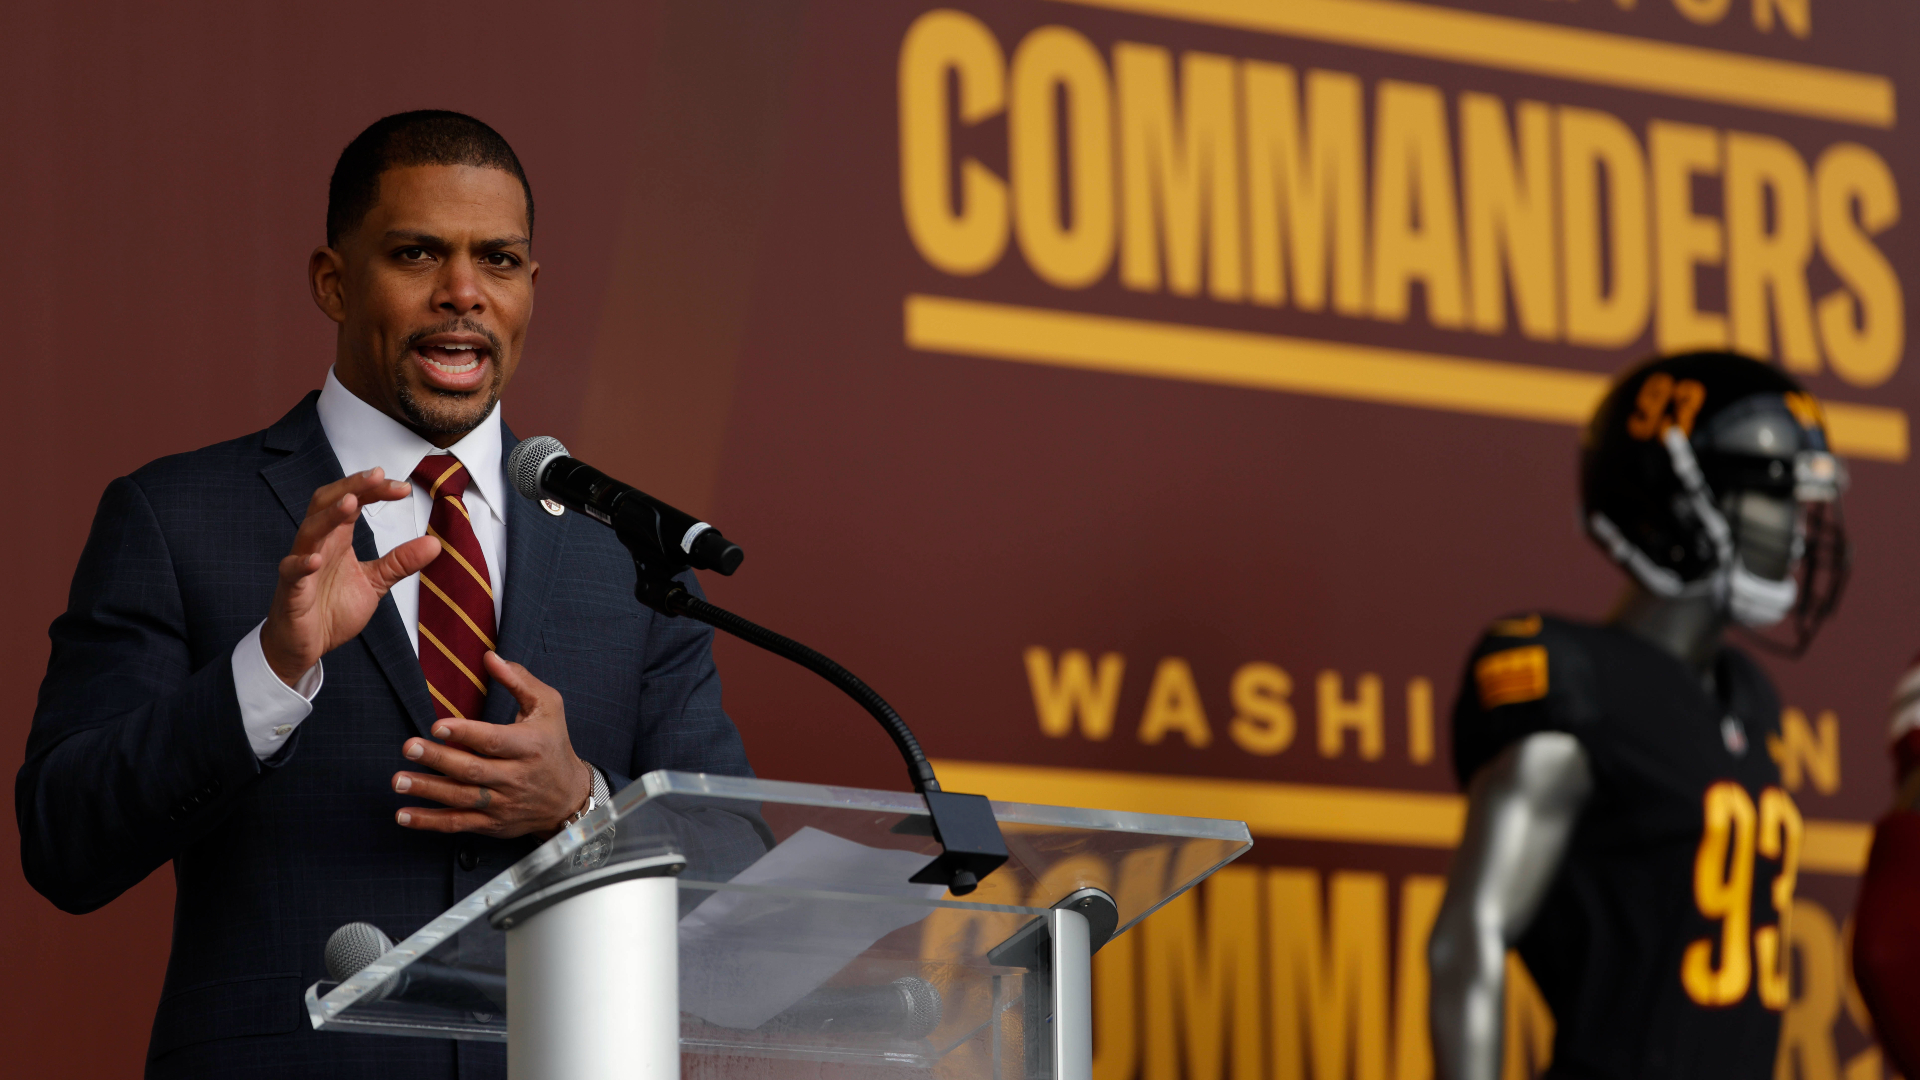 Jason Wright Says Commanders ‘Fits Well' With Washington's Old Fight Song